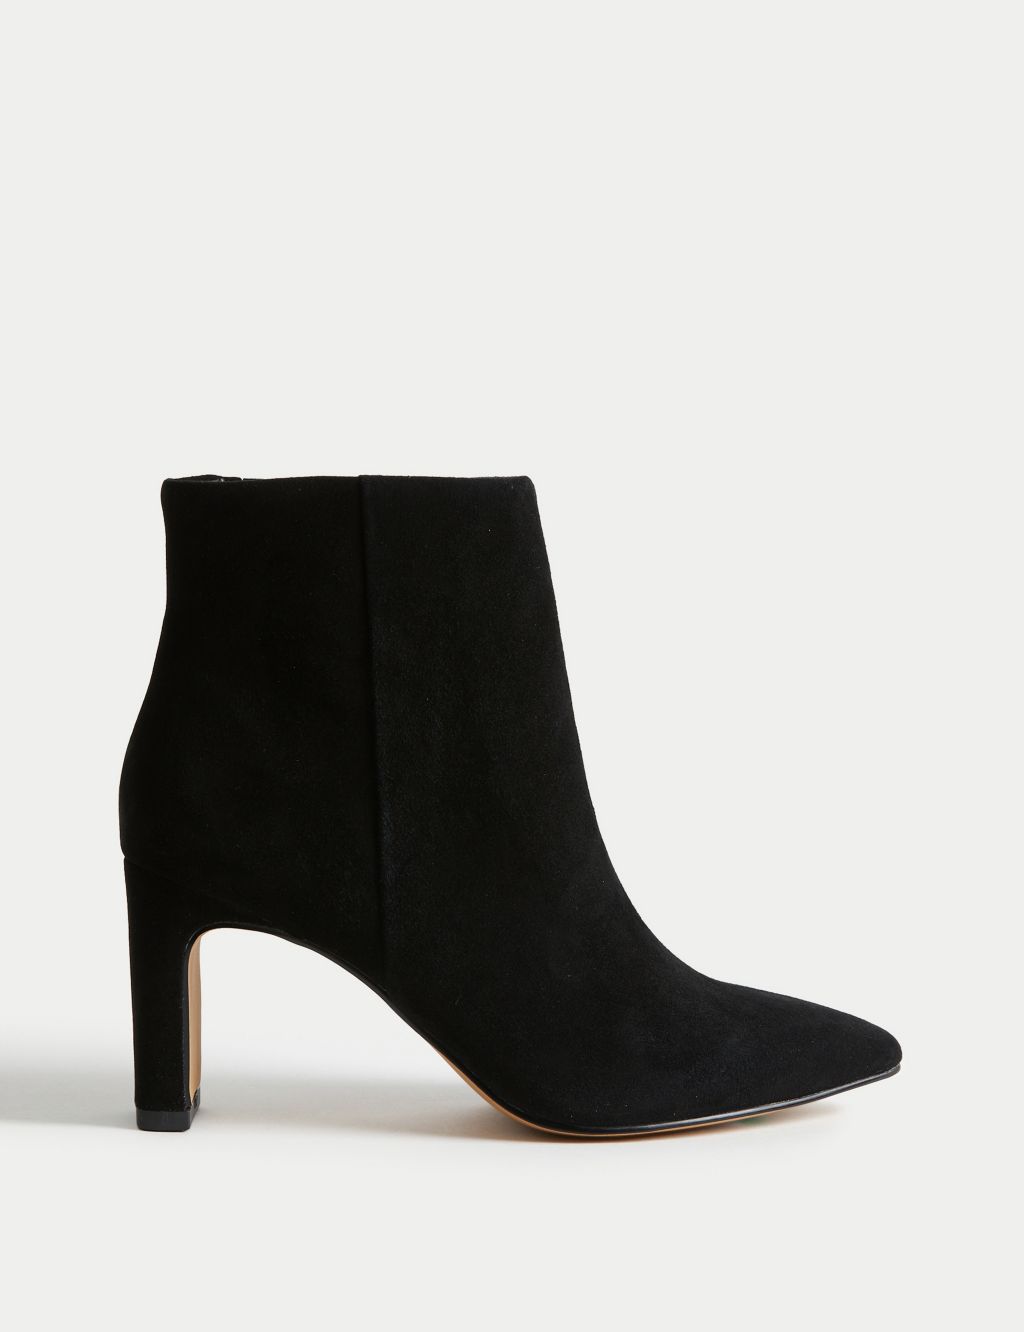 Suede Statement Pointed Ankle Boots image 1